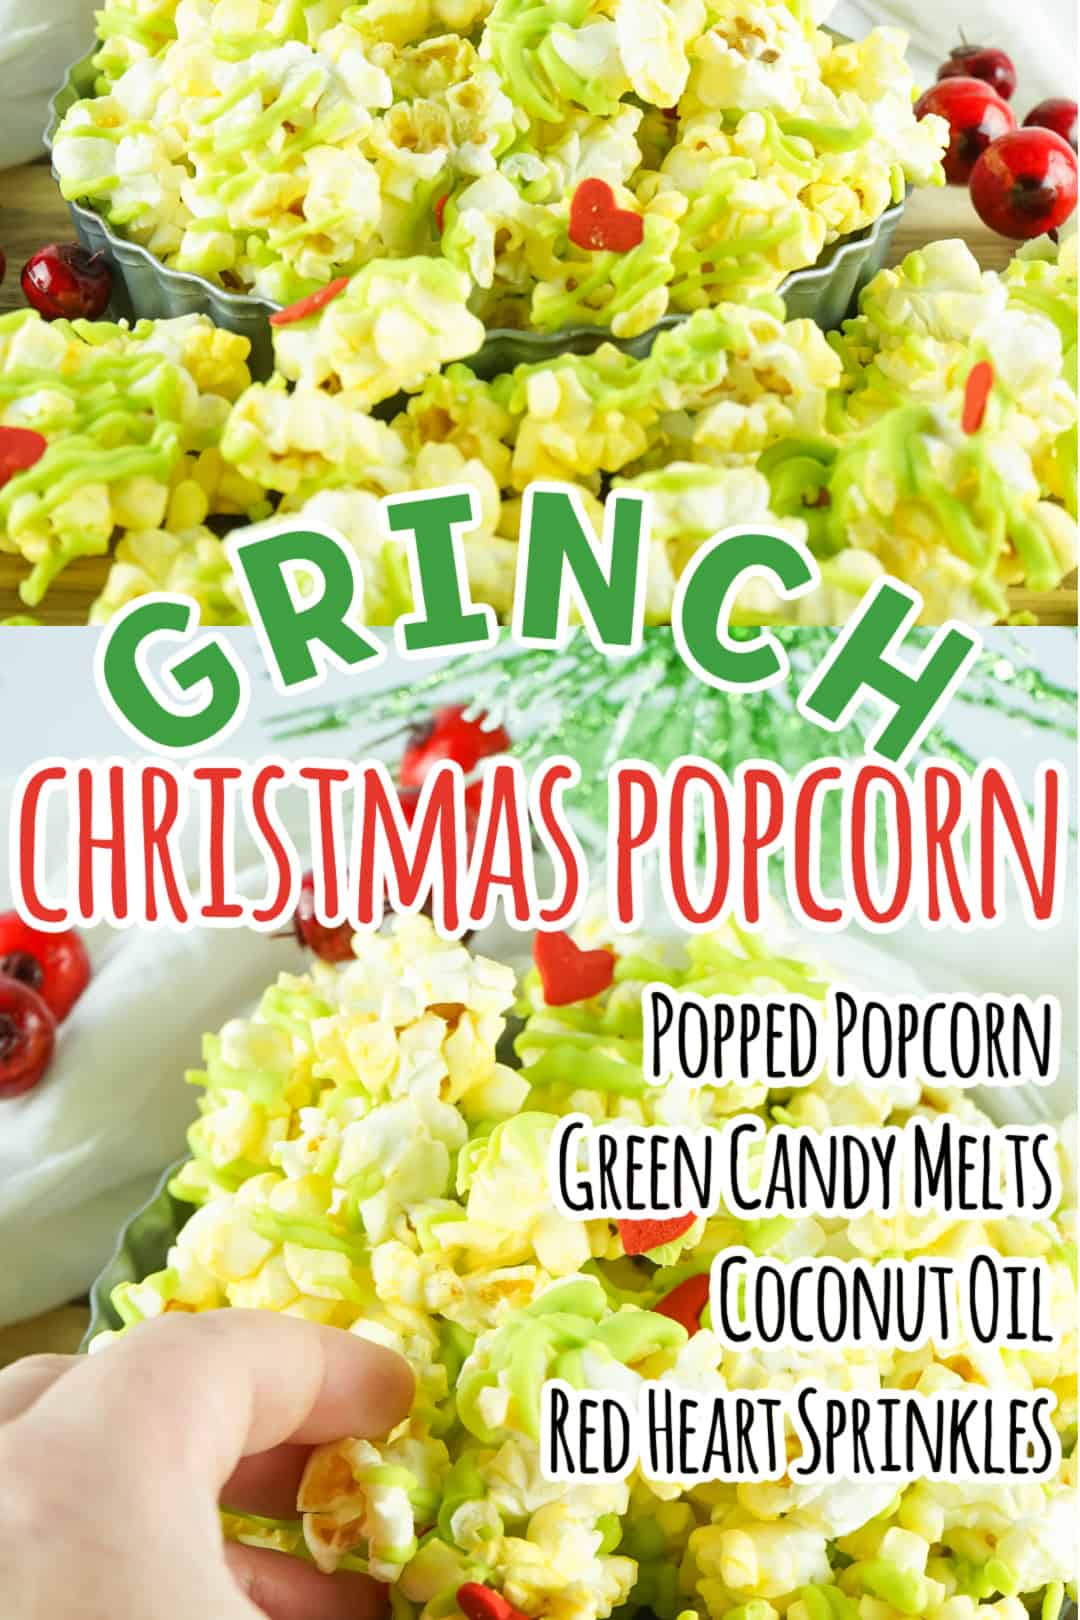 Grinch Popcorn - Cooking with Curls